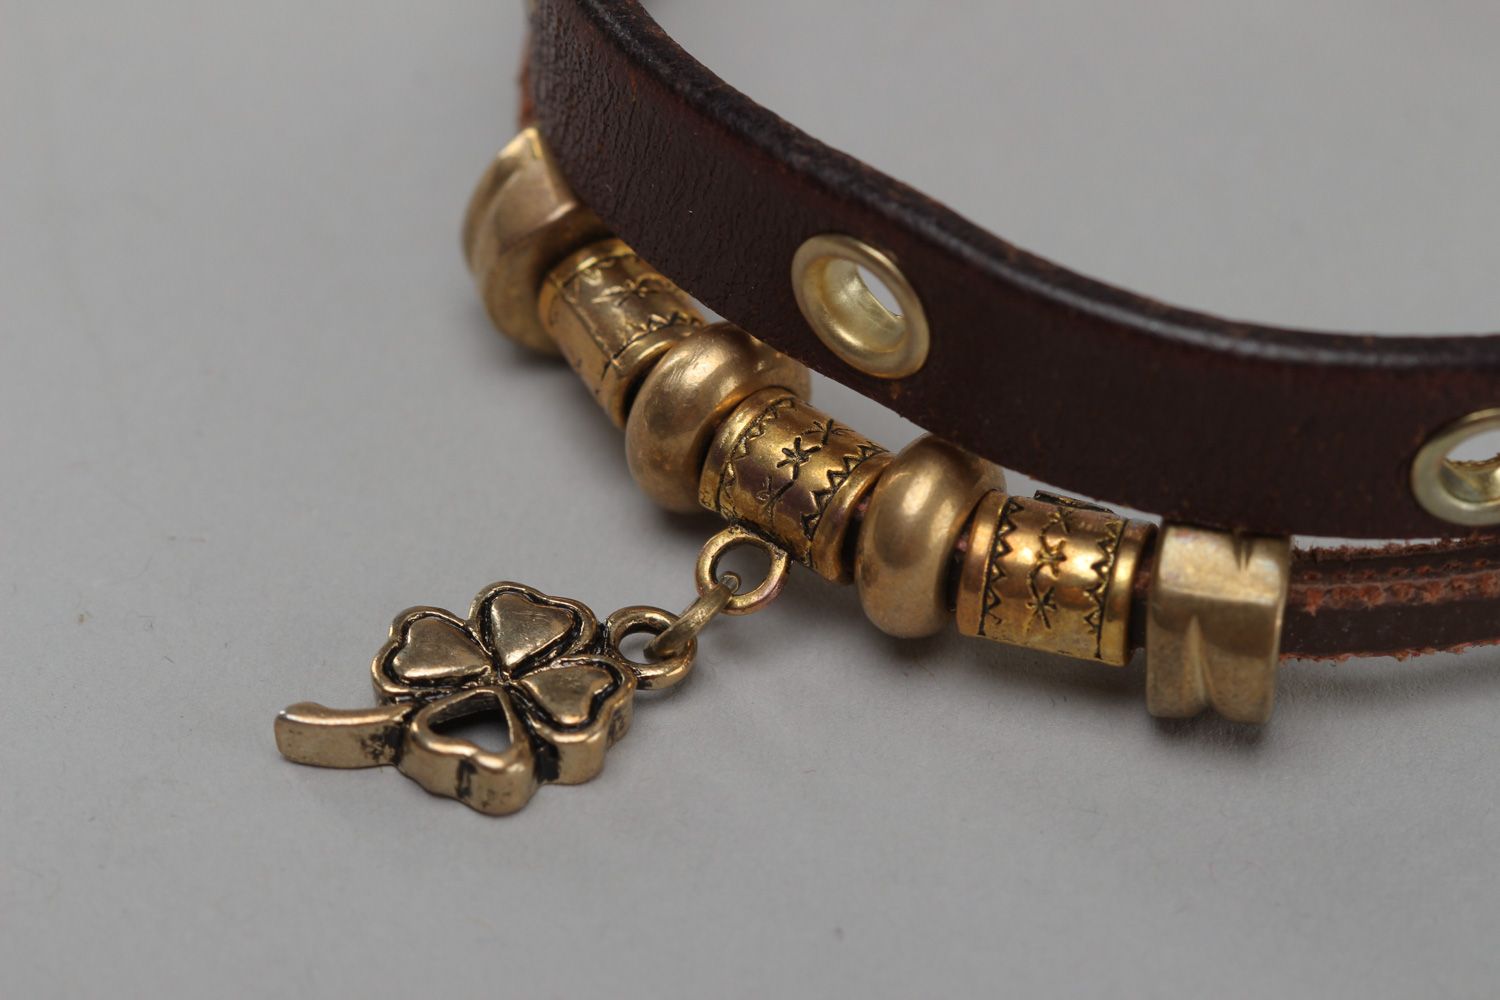 Handmade women's genuine leather bracelet with metal charm in the shape of clover photo 3